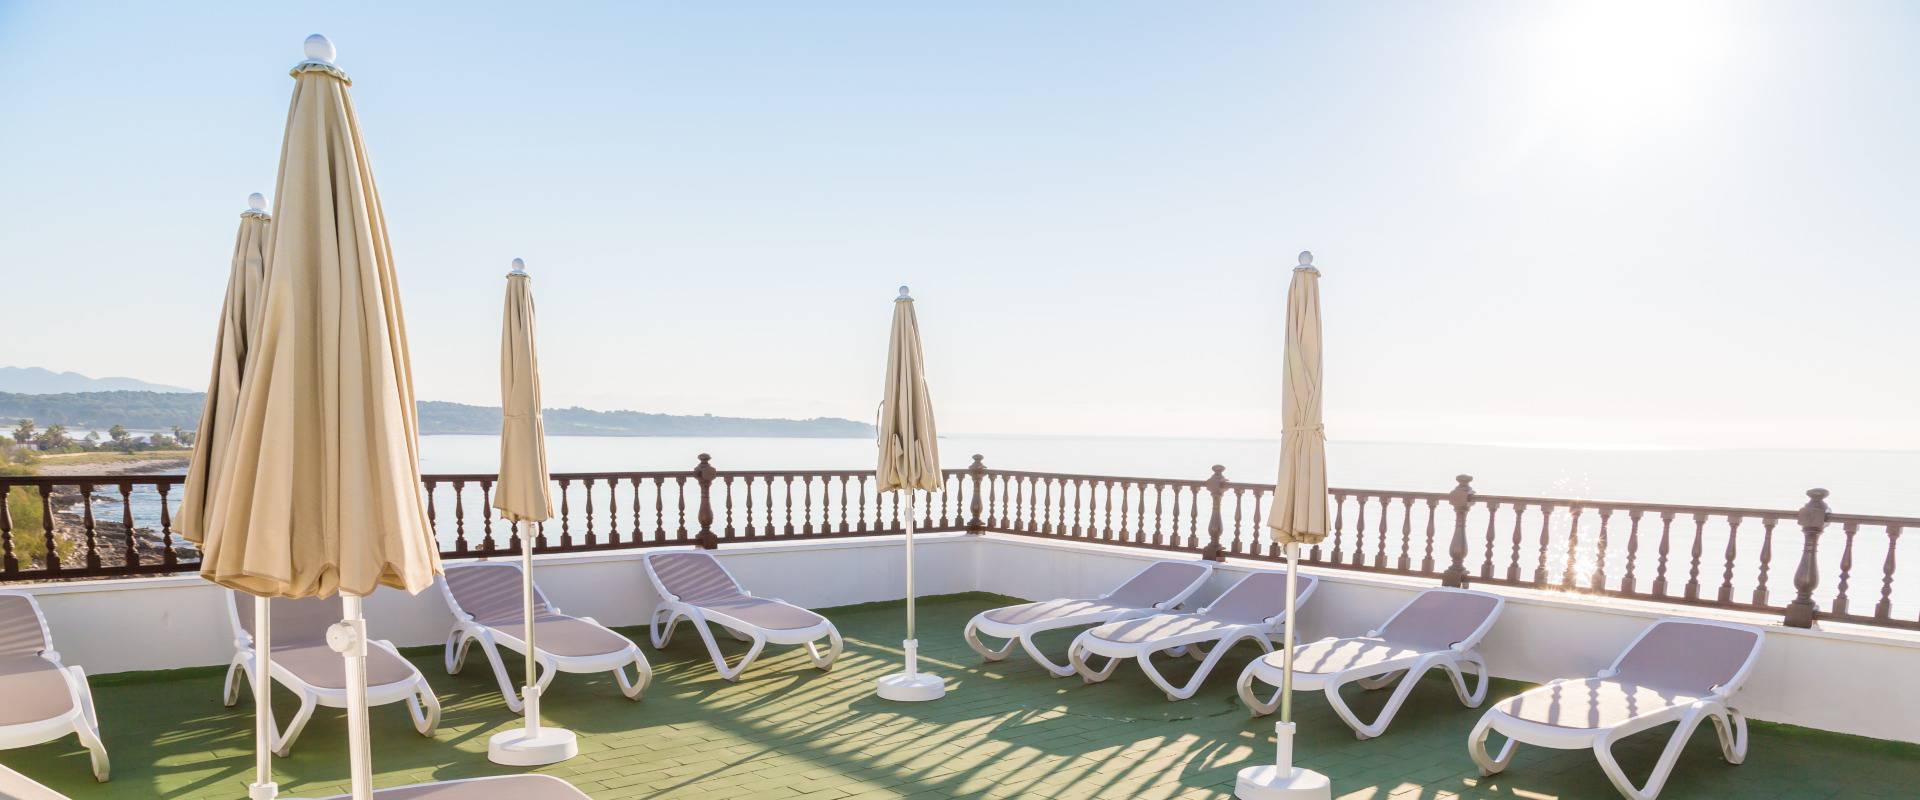  wellbeing   for the body and mind S'illot Hotel Majorca